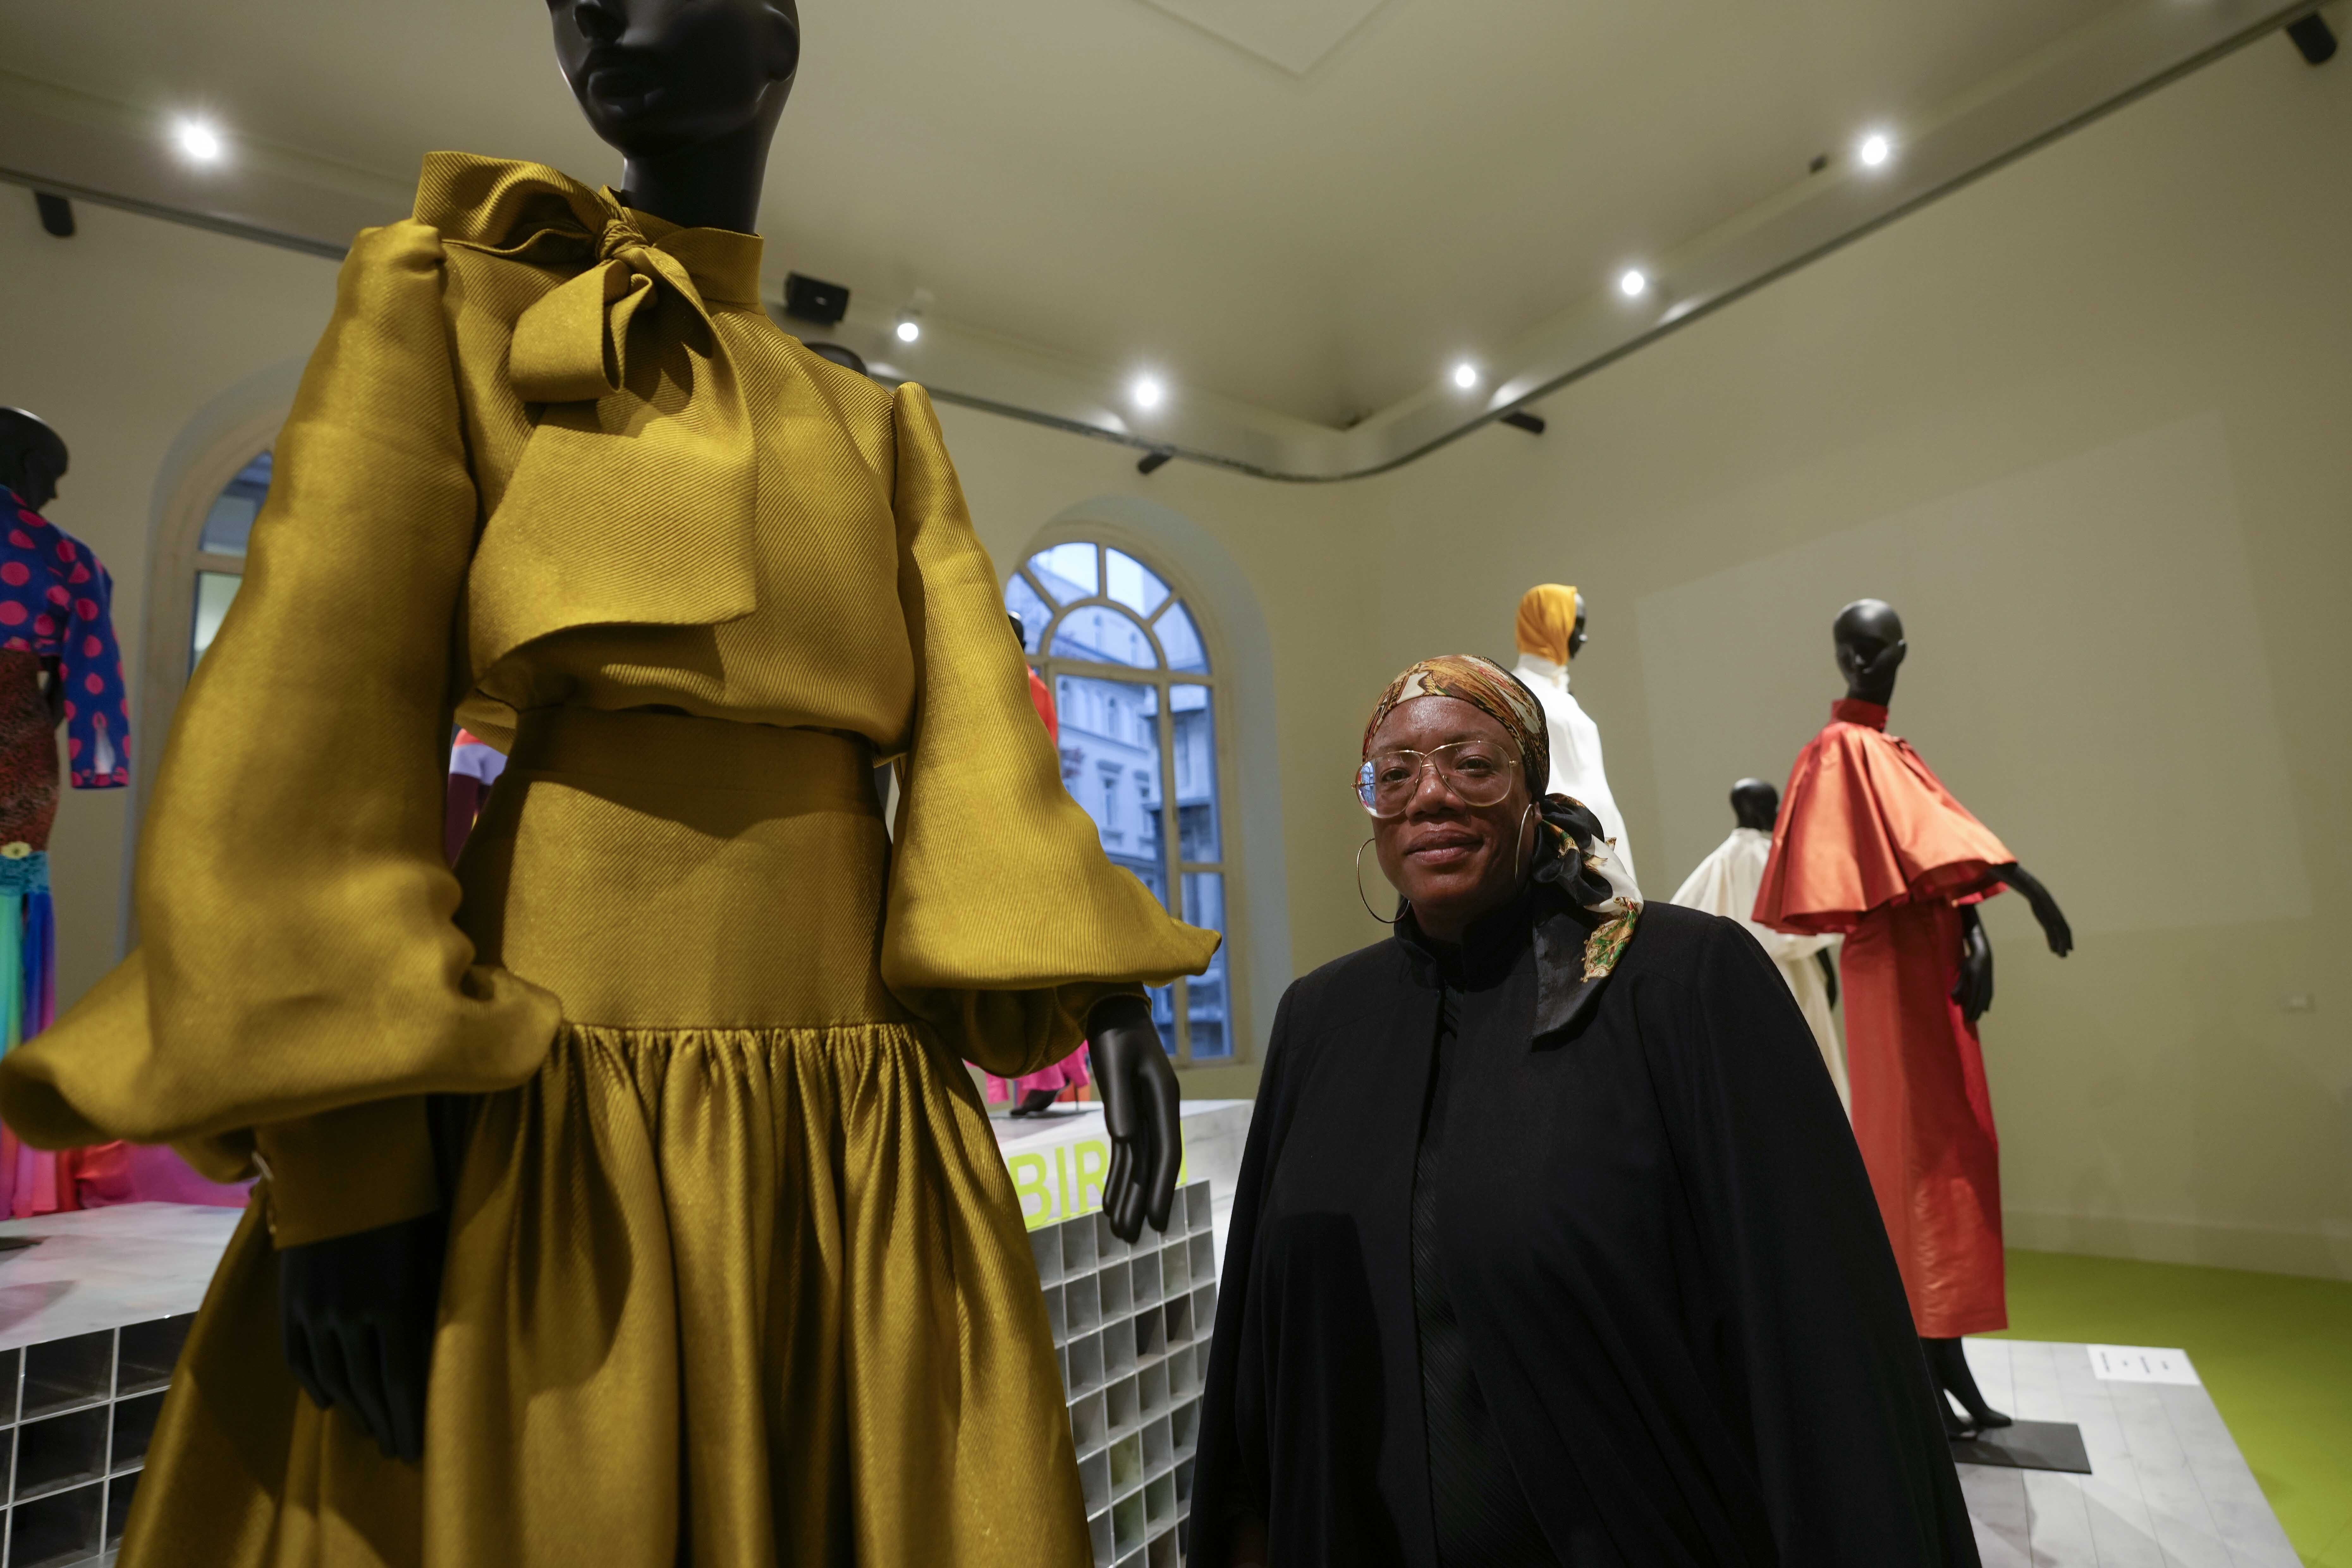 Milan fashion celebrated diversity and inclusion with refrain: Make more  space for color, curves - North Shore News